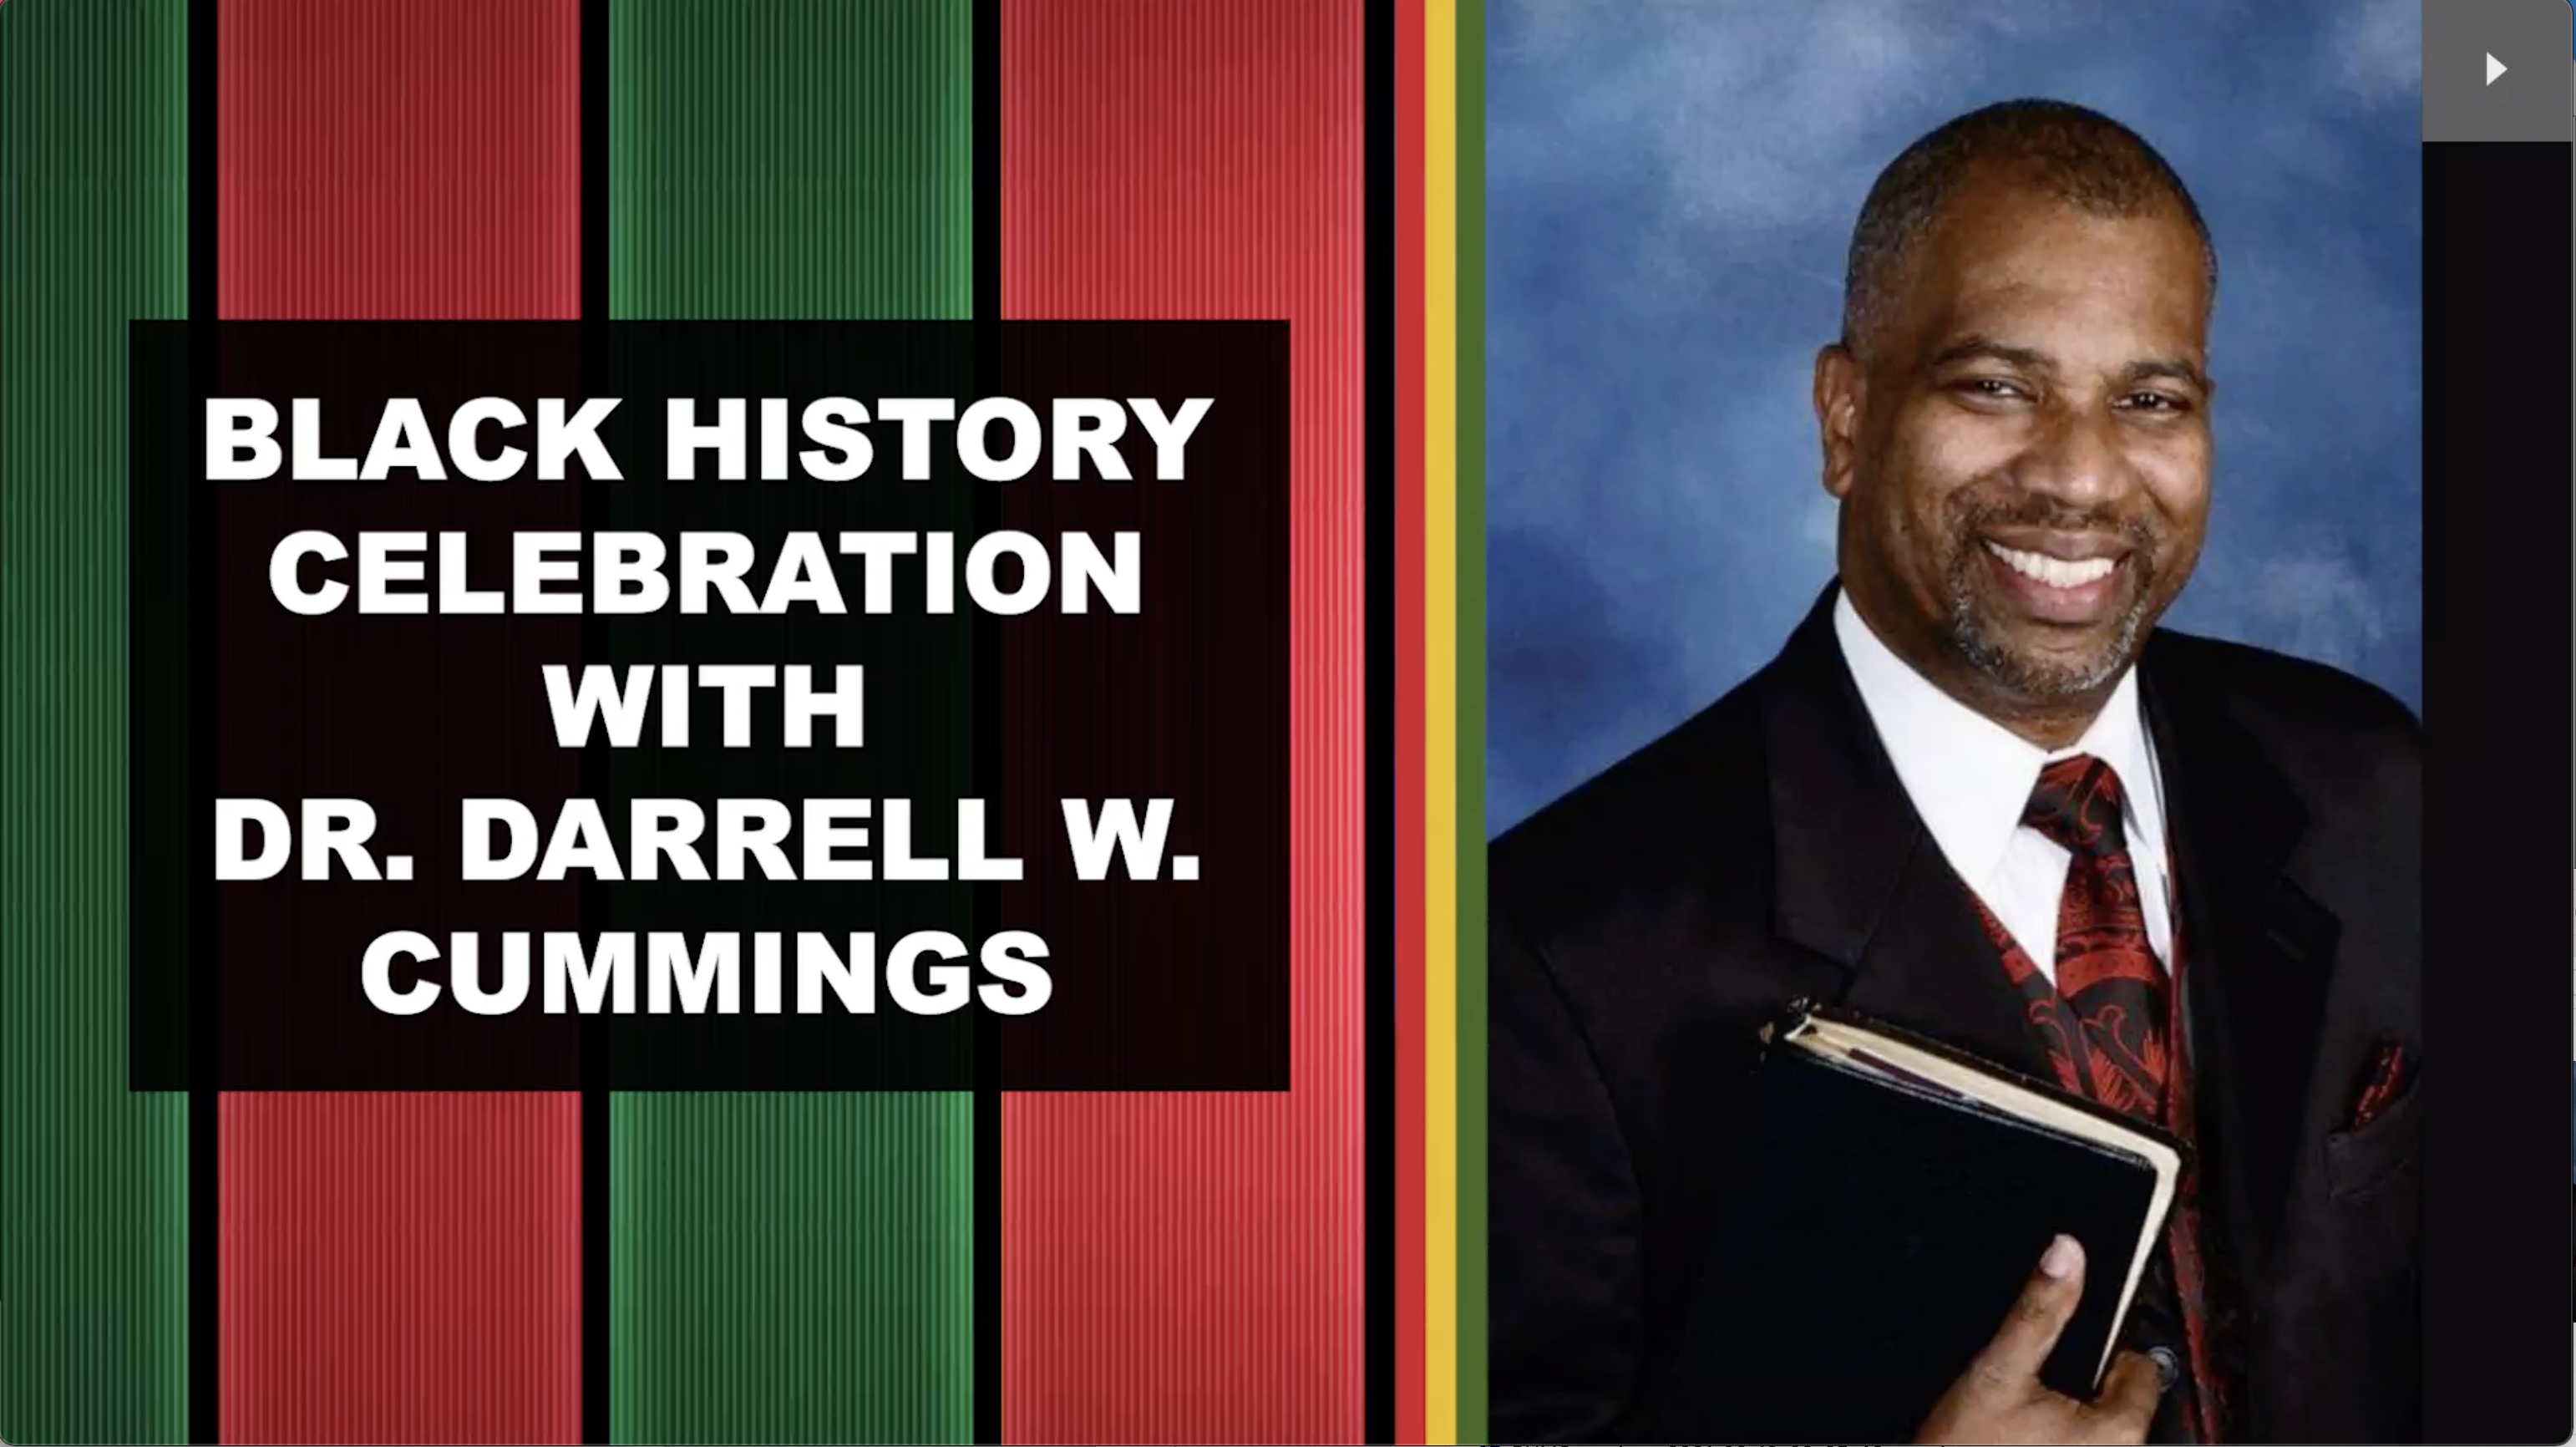 Thumbnail for Black History Celebration with Dr. Darrell W. Cummings